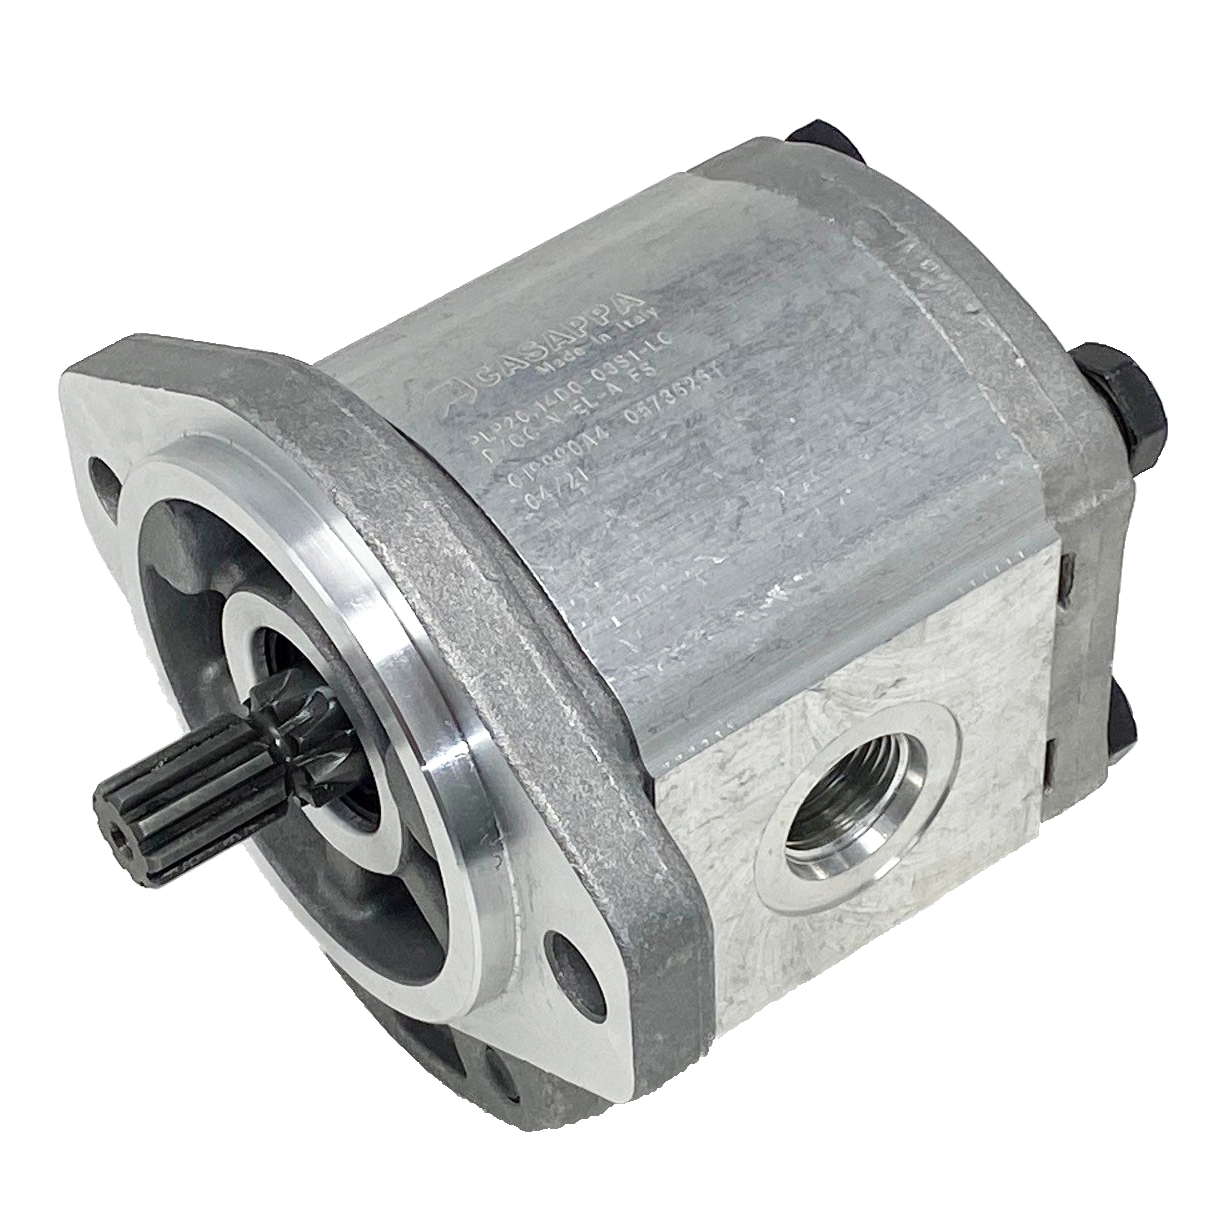 PLP20.16S0-49S1-LOF/OC-S7-N-EL-FS : Casappa Polaris Gear Pump, 16.85cc, 3625psi Rated, 3000RPM, CCW, 5/8" Keyed Shaft, SAE A 2-Bolt Flange, 1" #16 SAE Inlet, 0.625 (5/8") #10 SAE Outlet, Aluminum Body & Flange